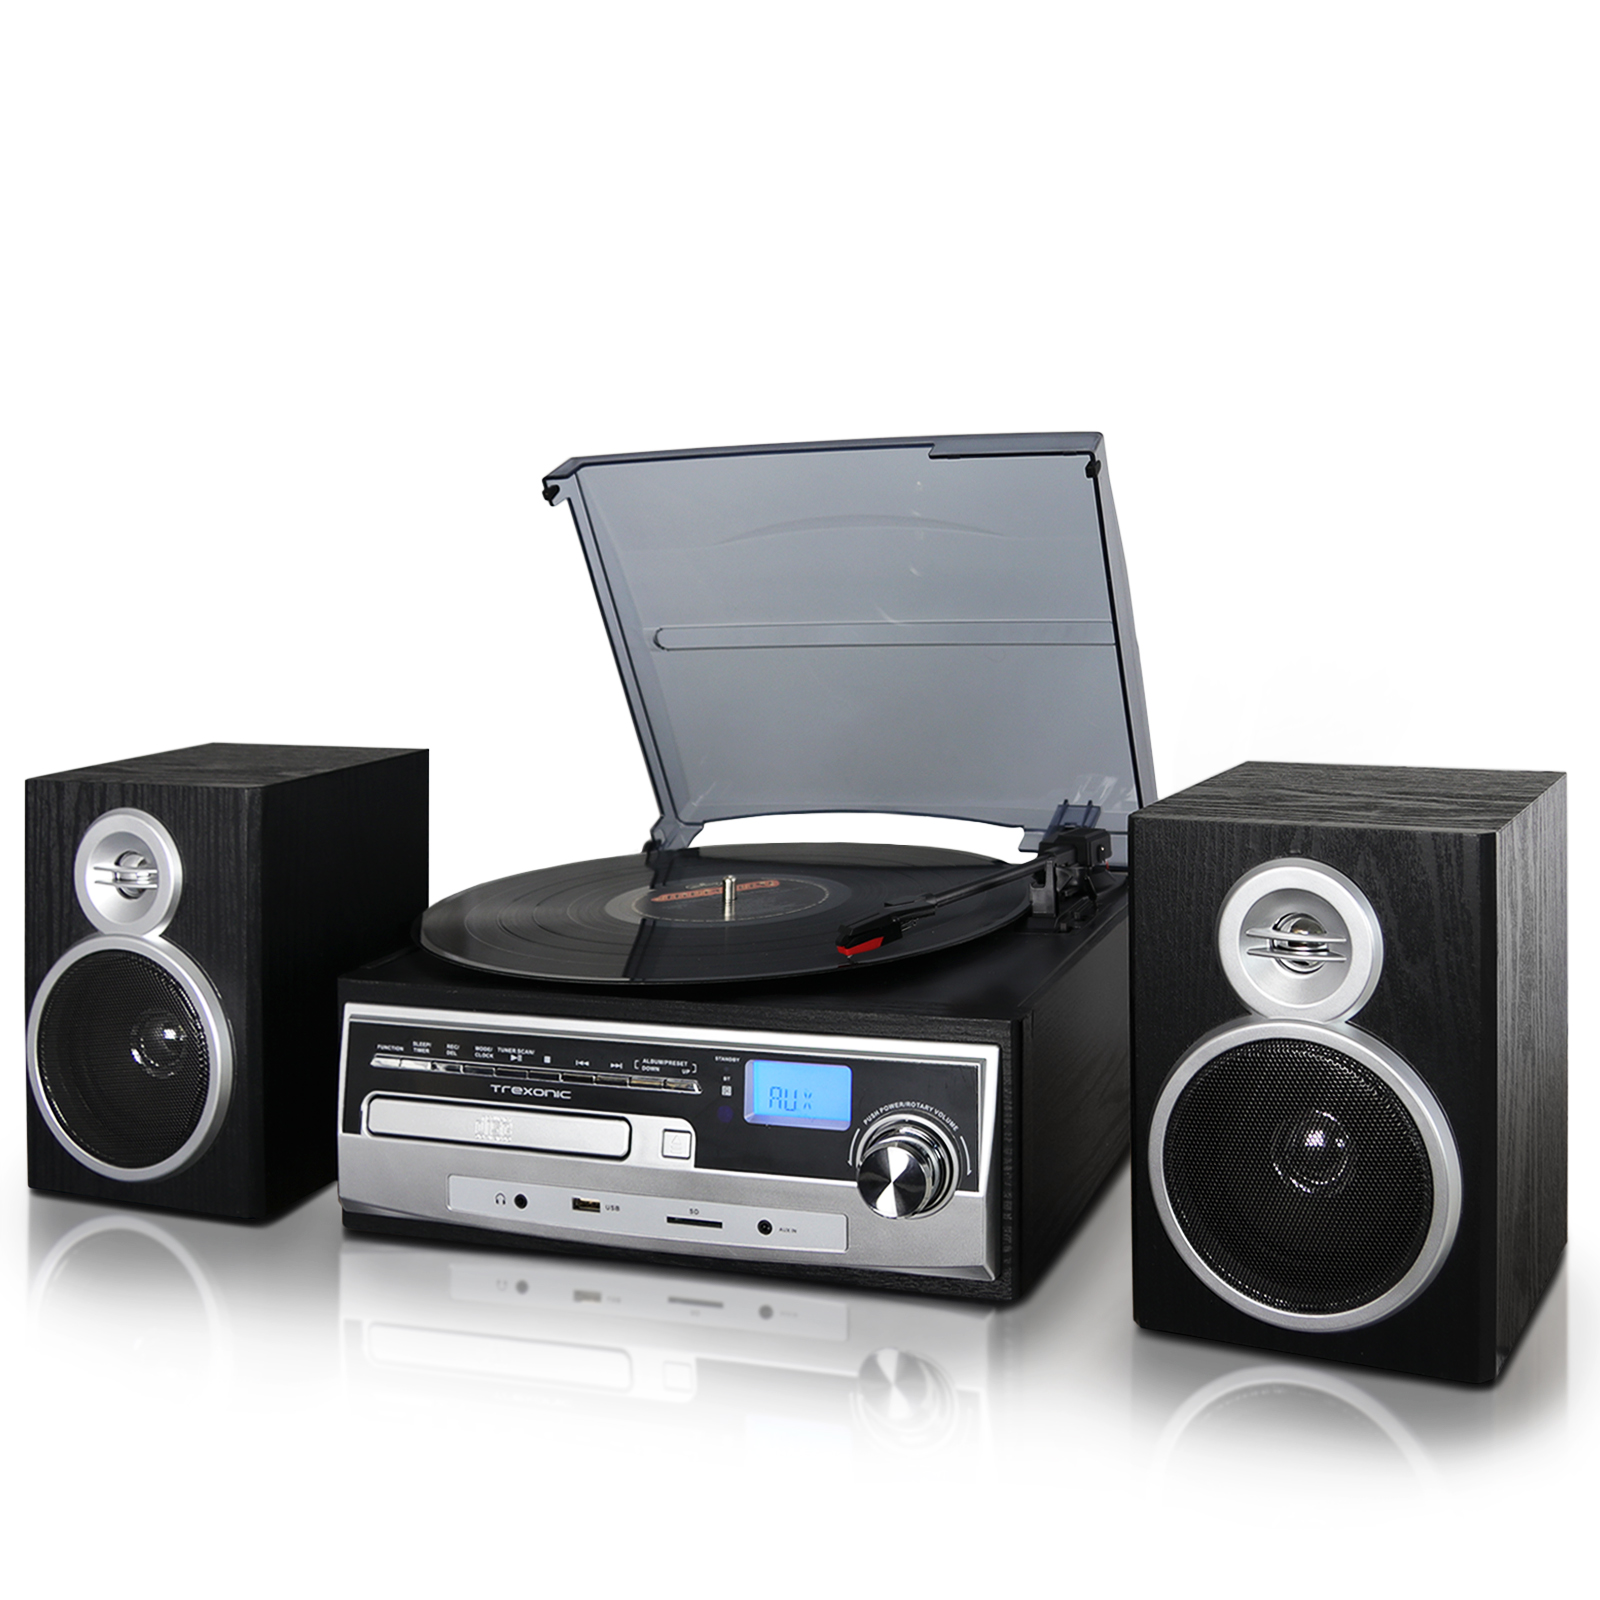 Trexonic 3-Speed Vinyl Turntable Home Stereo System with CD Player, FM Radio, Bluetooth, USB/SD Recording and Wired Shelf Speakers - image 1 of 3